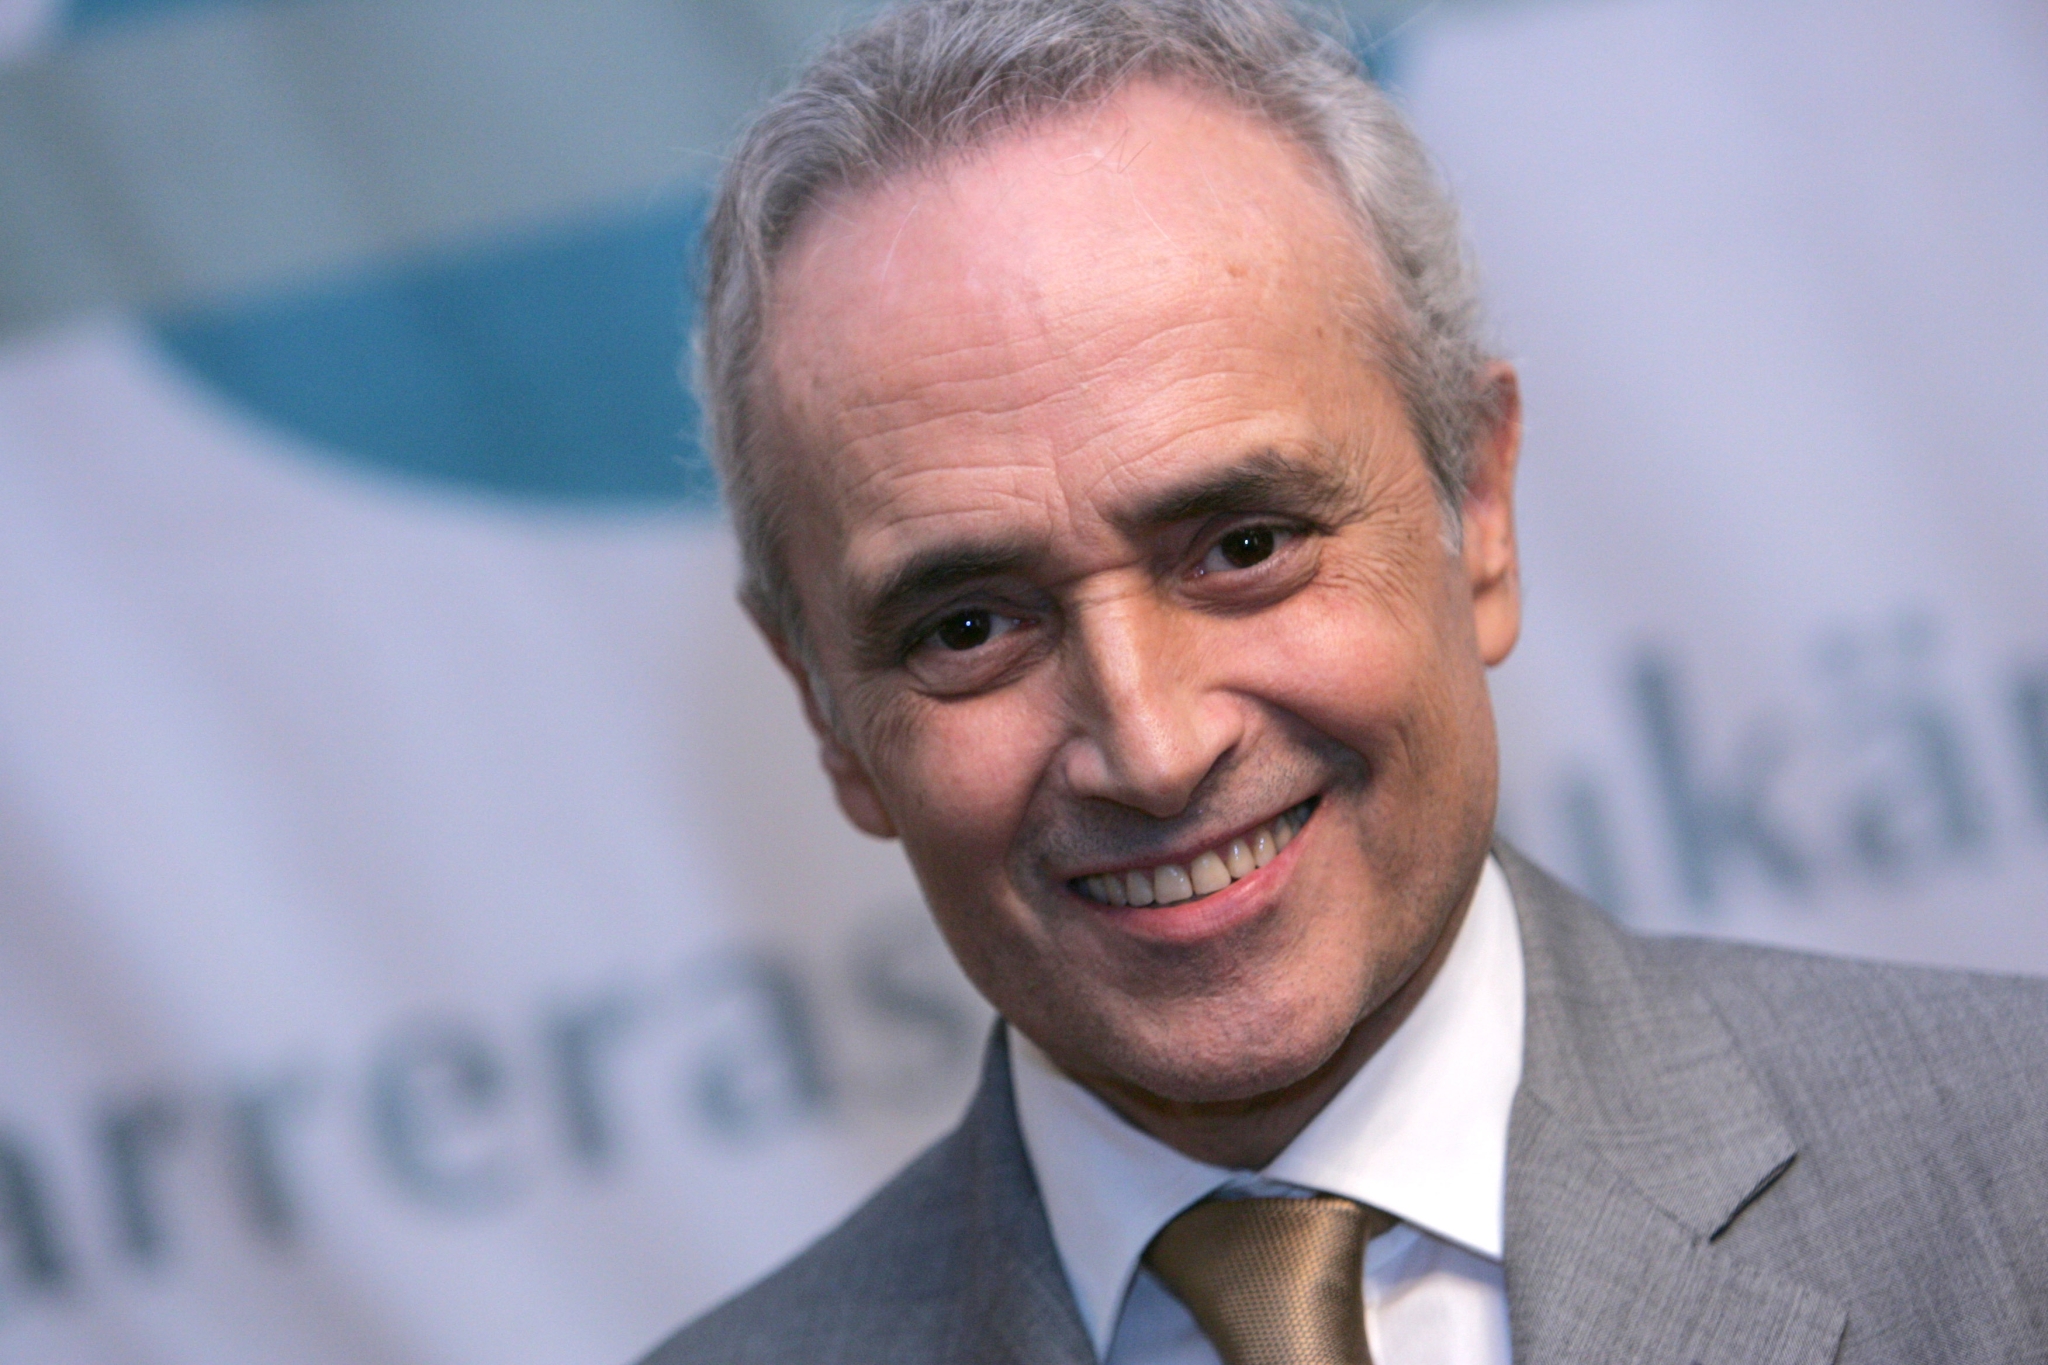 The German José Carreras Foundation supports the work of the Ulm researchers. (Photo: German José Carreras Foundation)